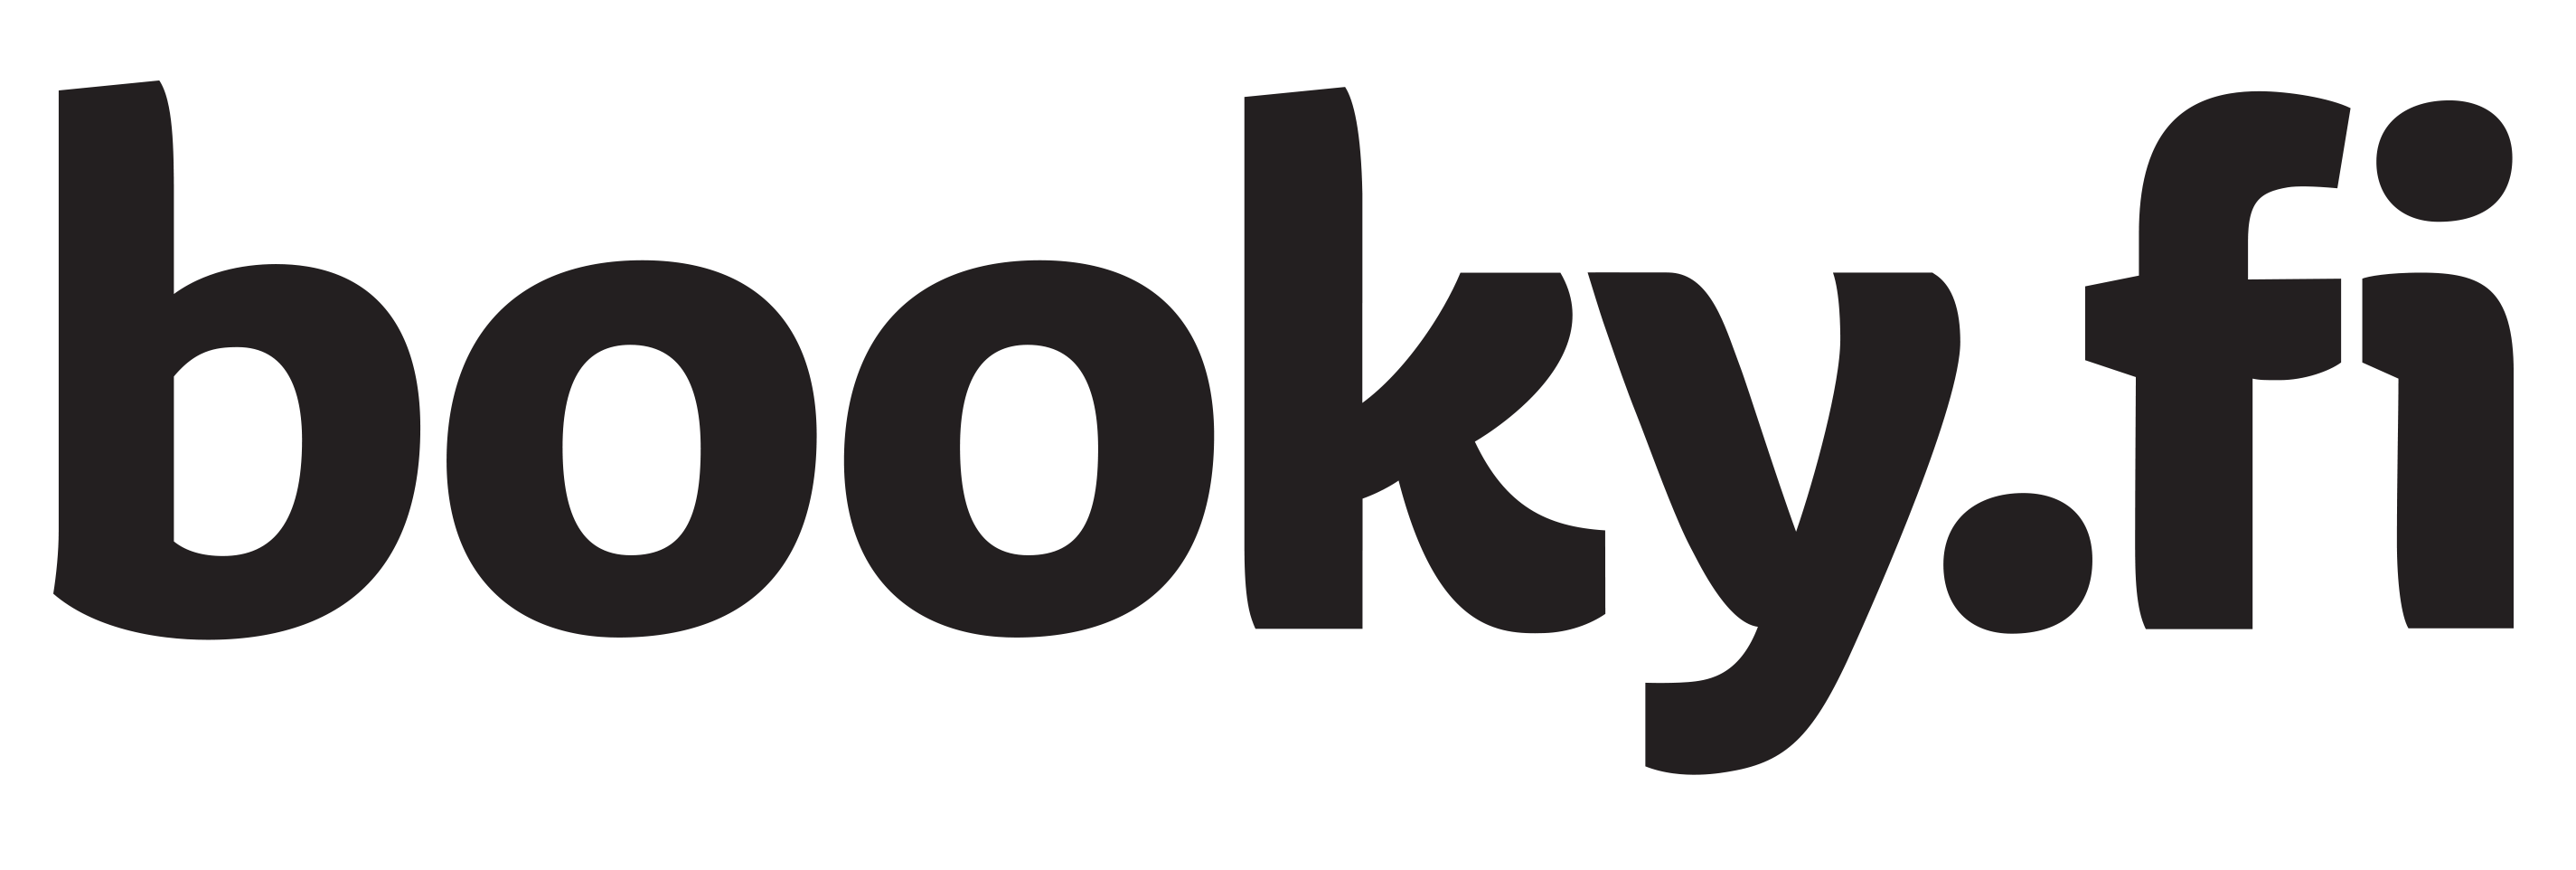 Booky_logo.png